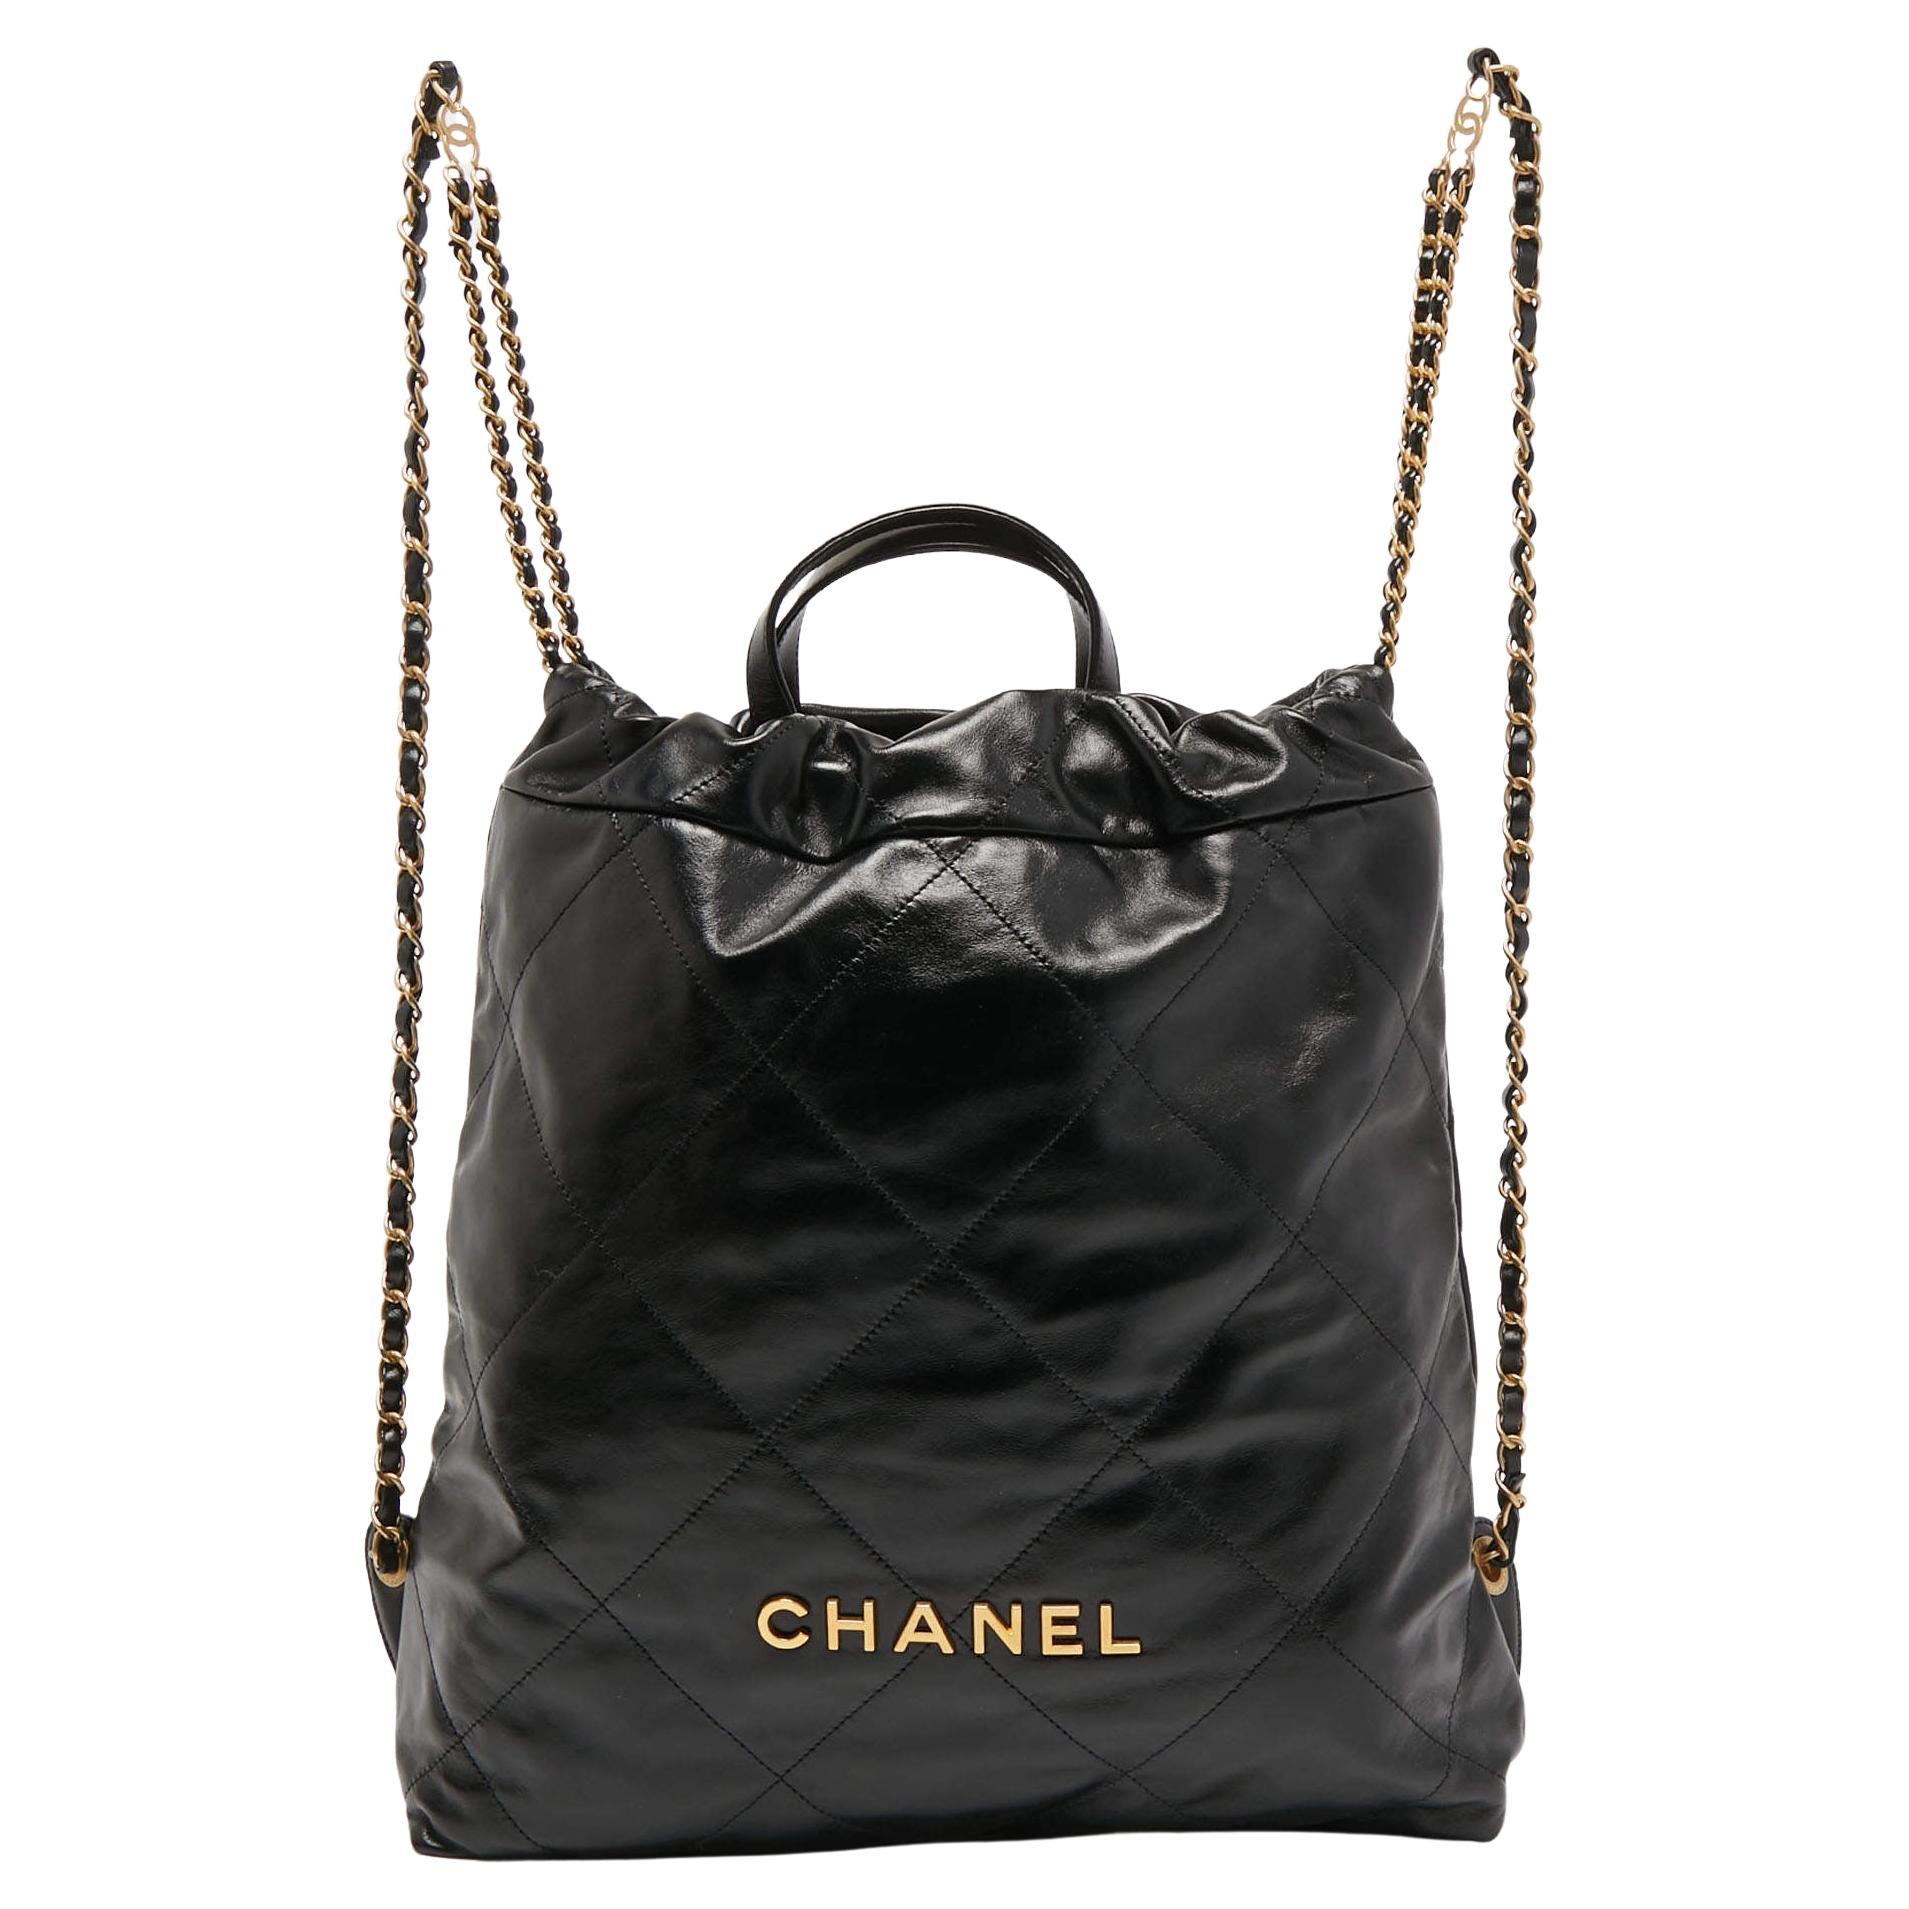 Chanel Black Shiny Quilted Leather 22 Backpack